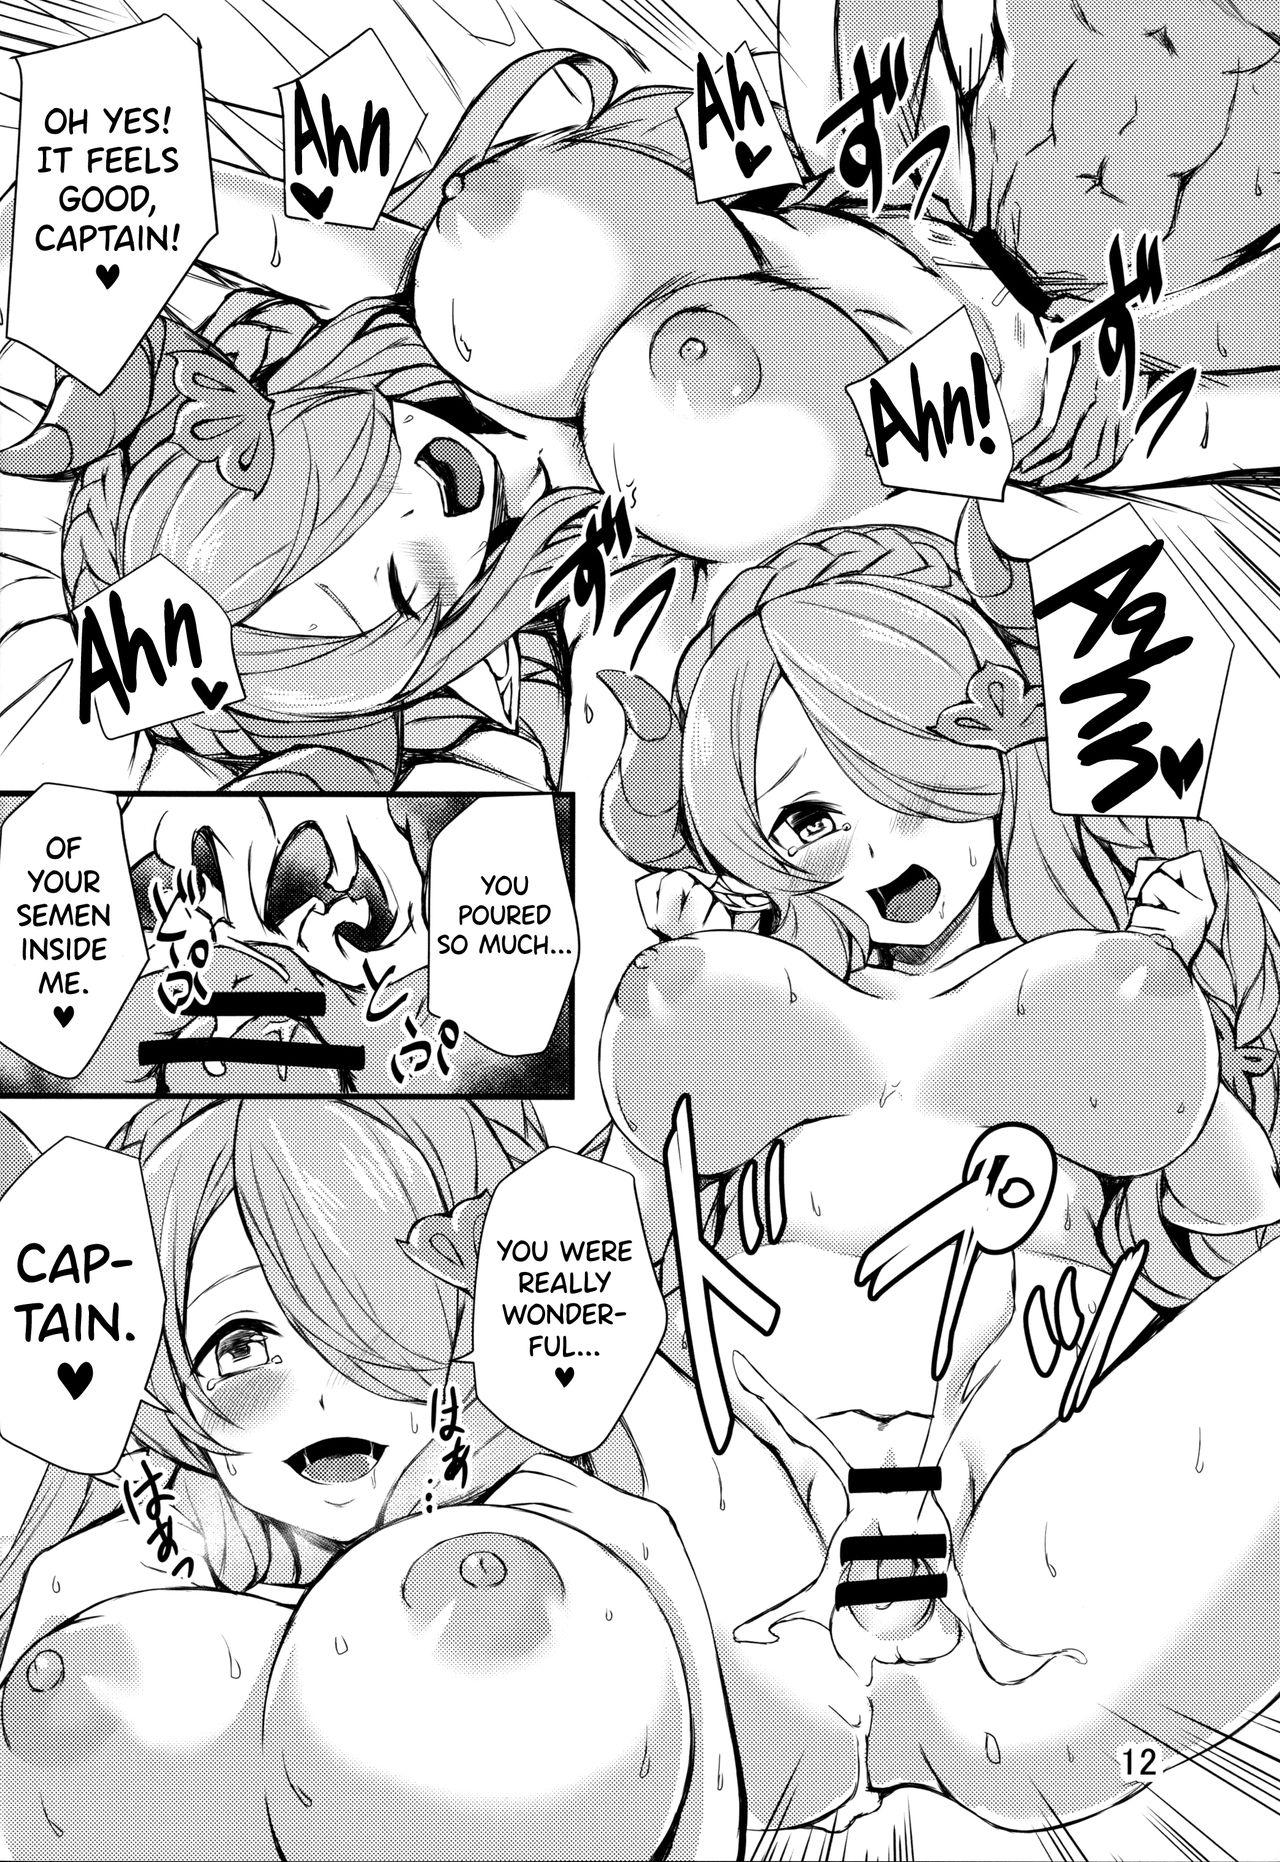 Public Nudity Sleepless Night at the Female Draph's Room - Granblue fantasy Titties - Page 11